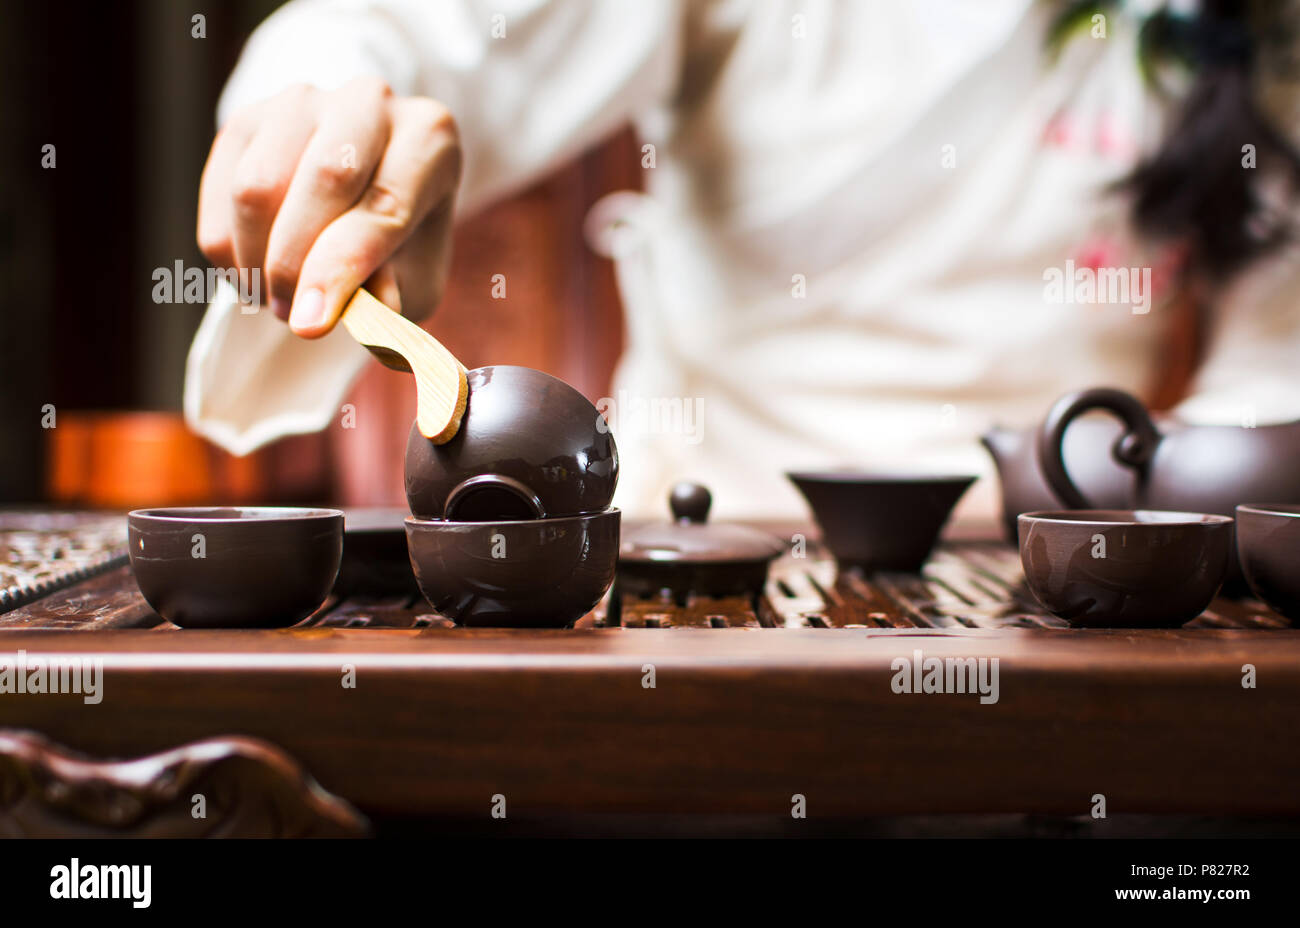 Chinese tea ceremony, woman cleaning teacup with boiled water Stock Photo